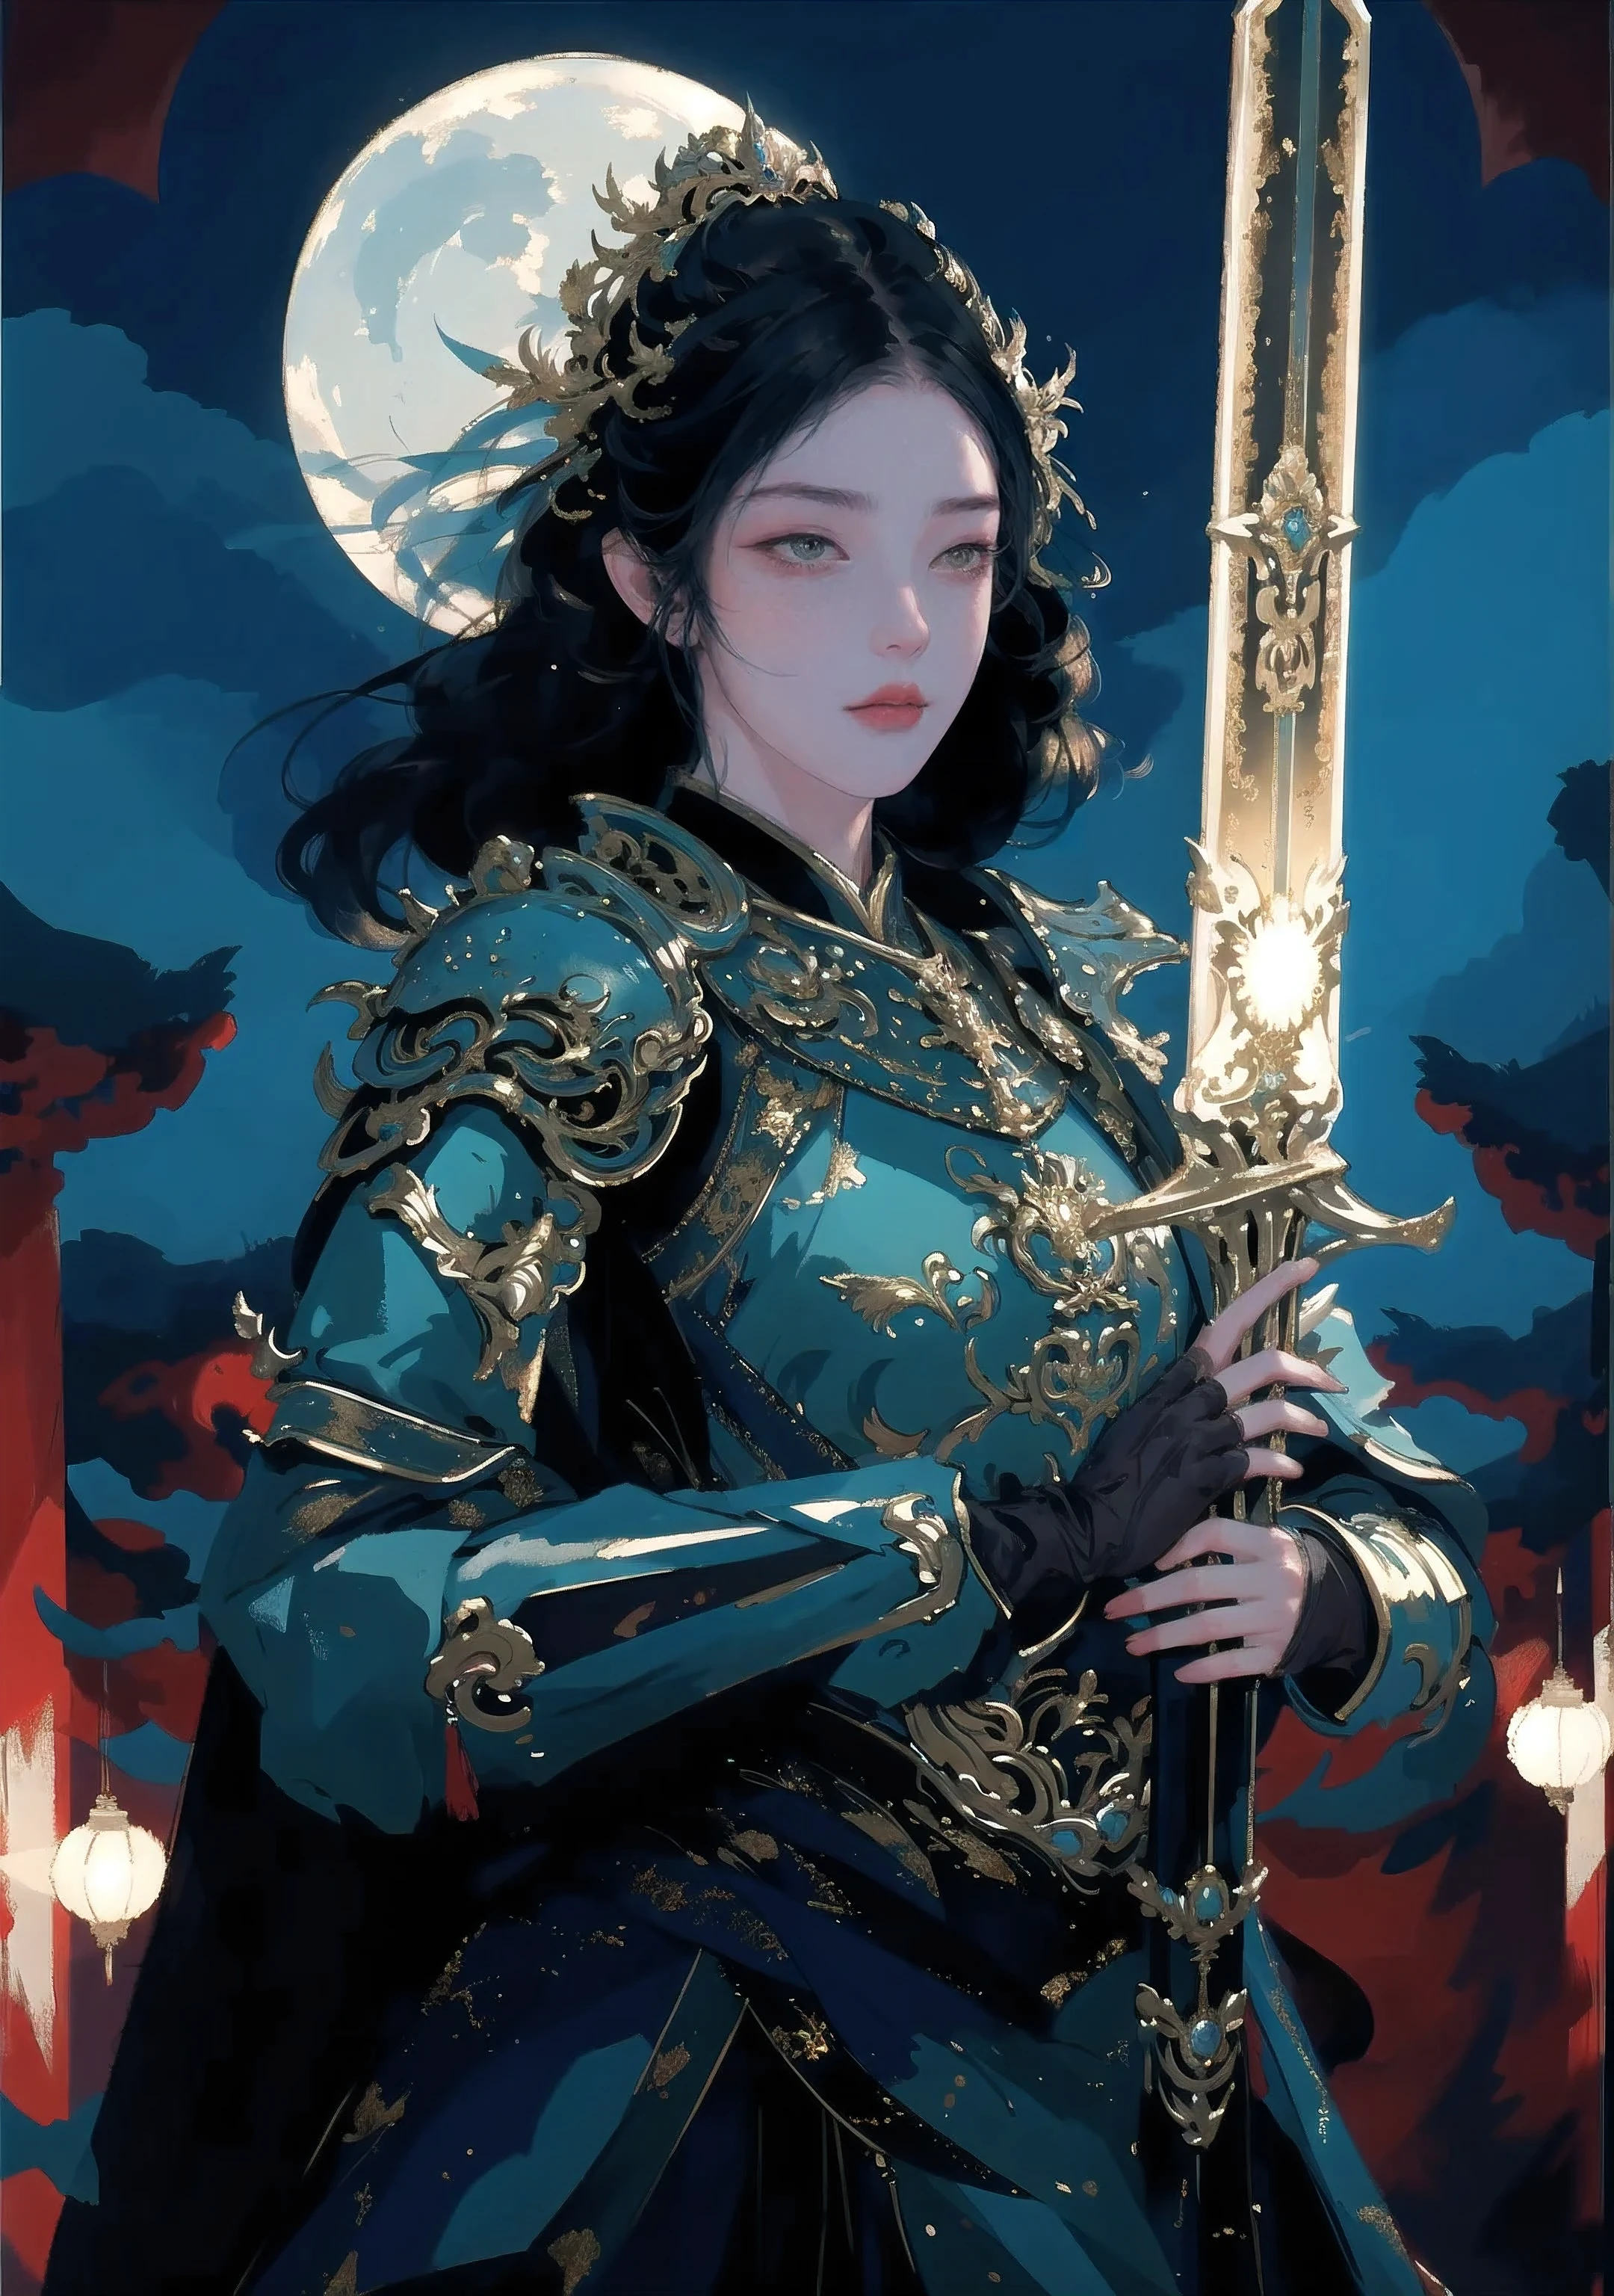 (best quality,4k,8k,highres,masterpiece:1.2),ultra-detailed,(realistic,photorealistic,photo-realistic:1.37),Chinese Knight,armor,female,clutching a sword,determined expression,dark and fiery atmosphere,shimmering steel armor,ornate helmet,majestic stance,rays of sunlight piercing through clouds,graceful flowing cape,battle scars telling tales of heroic battles,vibrant red and gold color scheme,illuminated by the warm golden light,soft shadows caressing the knight's face,sharp focus on the intricate details of the armor,clouds of smoke swirling around the knight,providing a mysterious and dramatic backdrop,breathtaking level of realism,captured with vivid colors and precise brushstrokes,dynamic composition with the knight positioned in the foreground,blurred background to create depth and emphasize the knight's presence,combining traditional Chinese art elements with a modern and cinematic style.